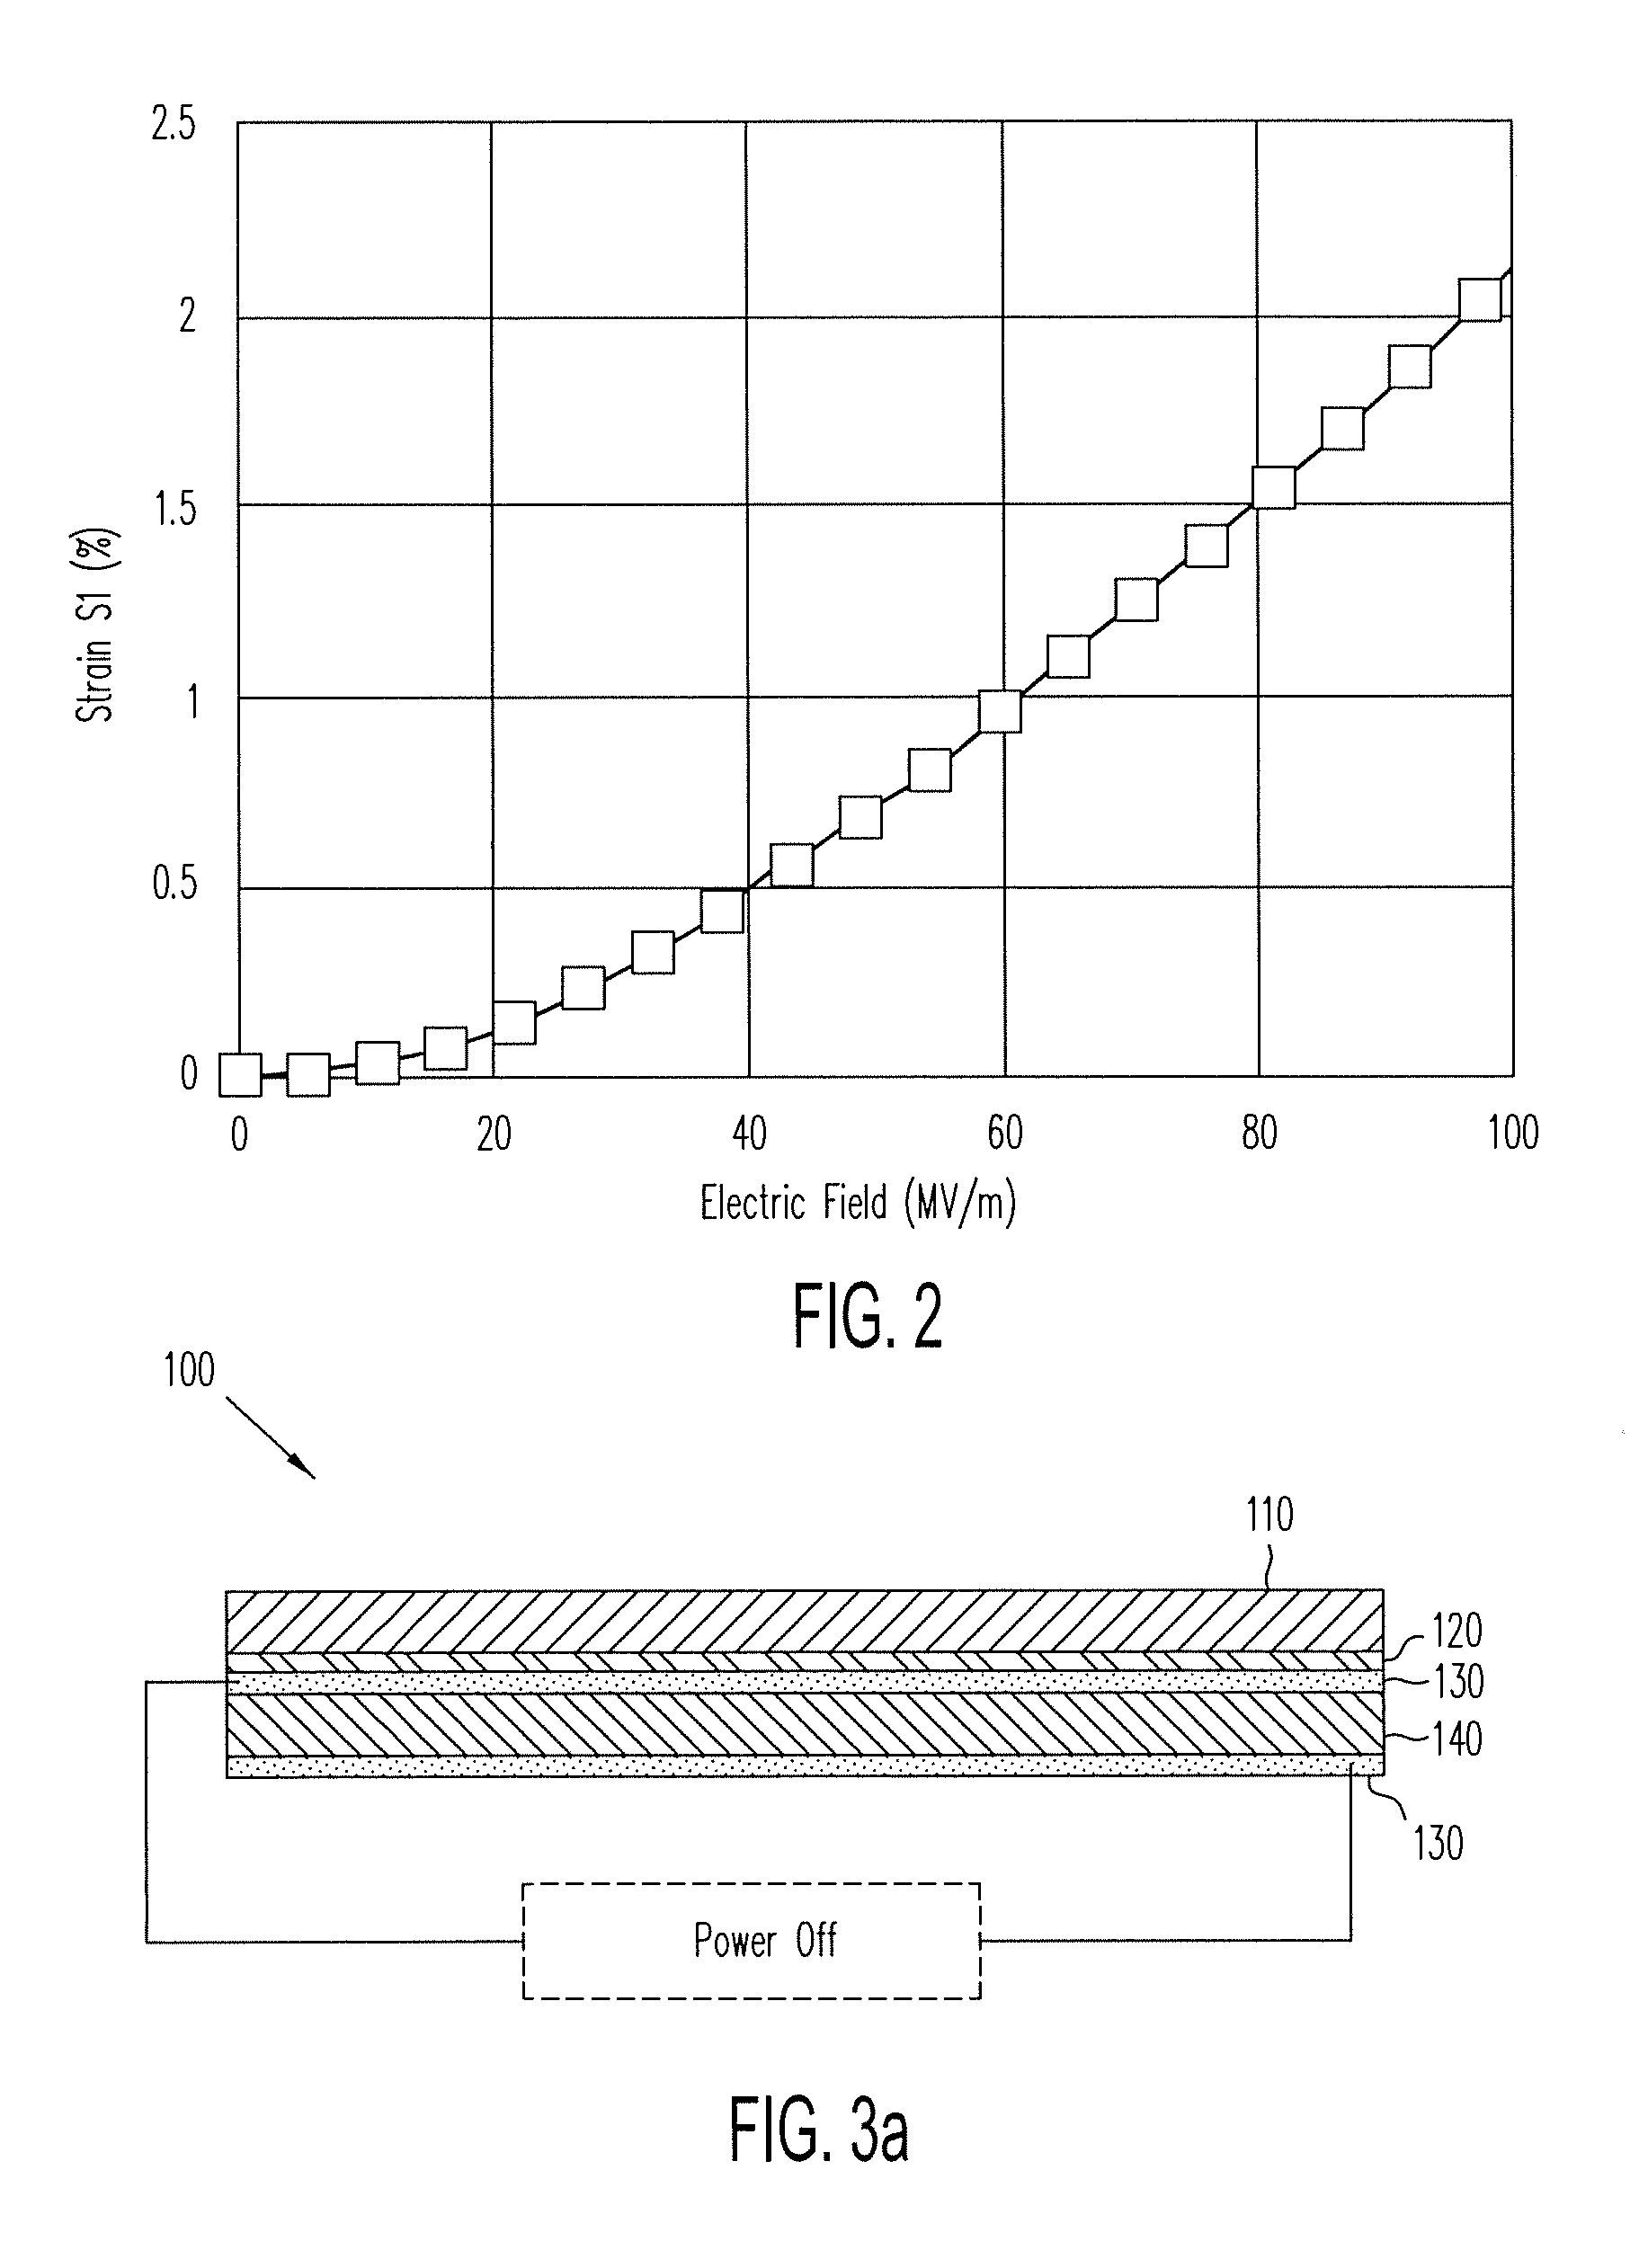 Systems including electromechanical polymer sensors and actuators